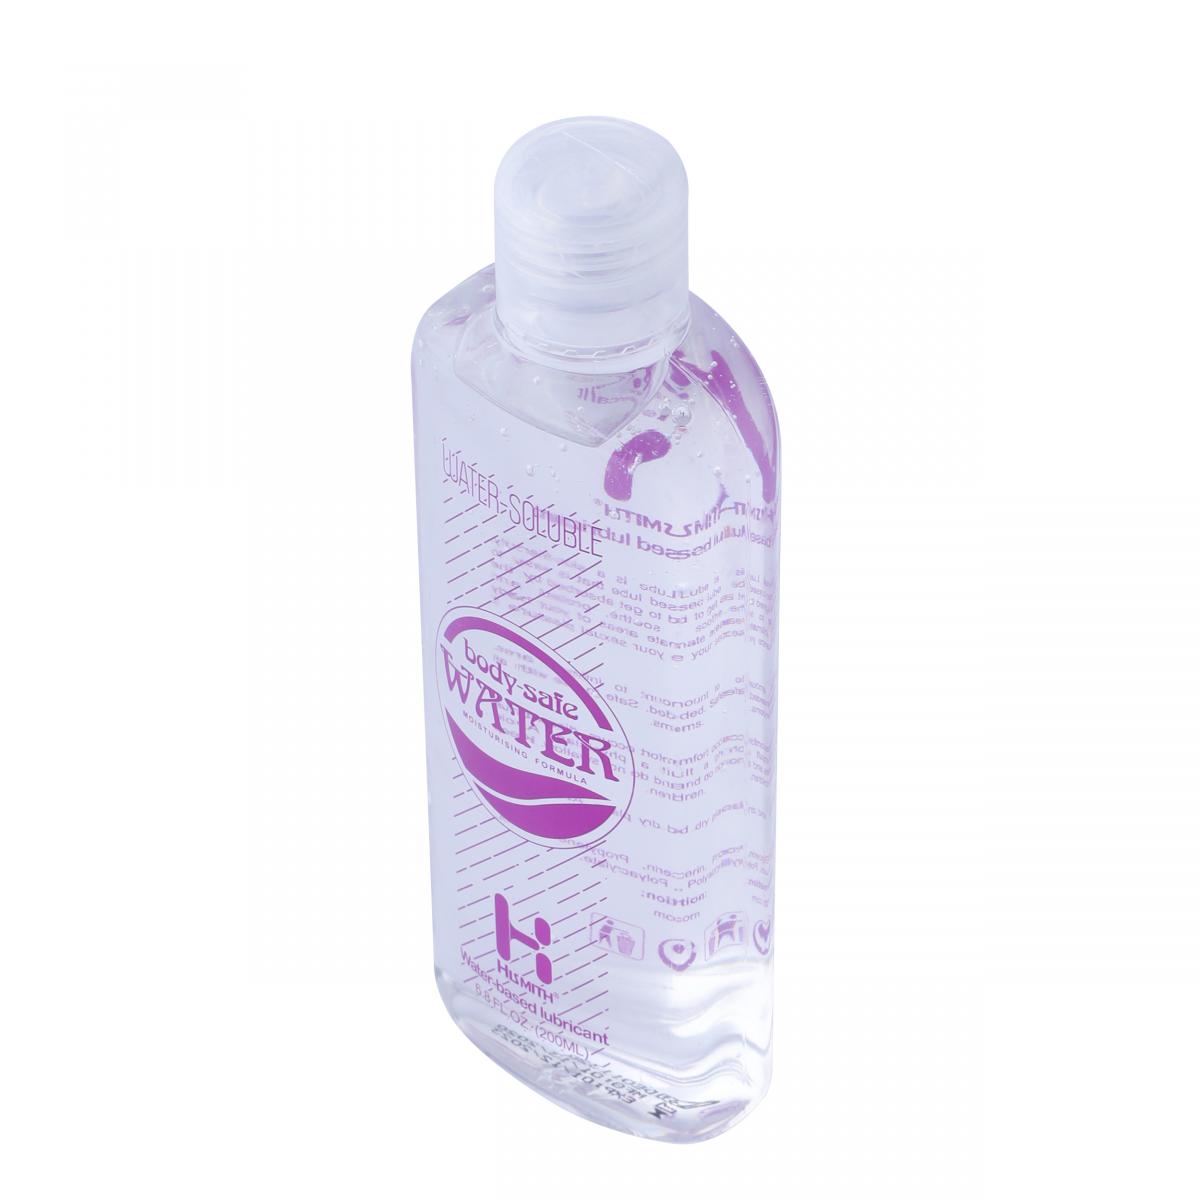 Hismith Premium Water-based Lubricant Lubricant! Pure and natural